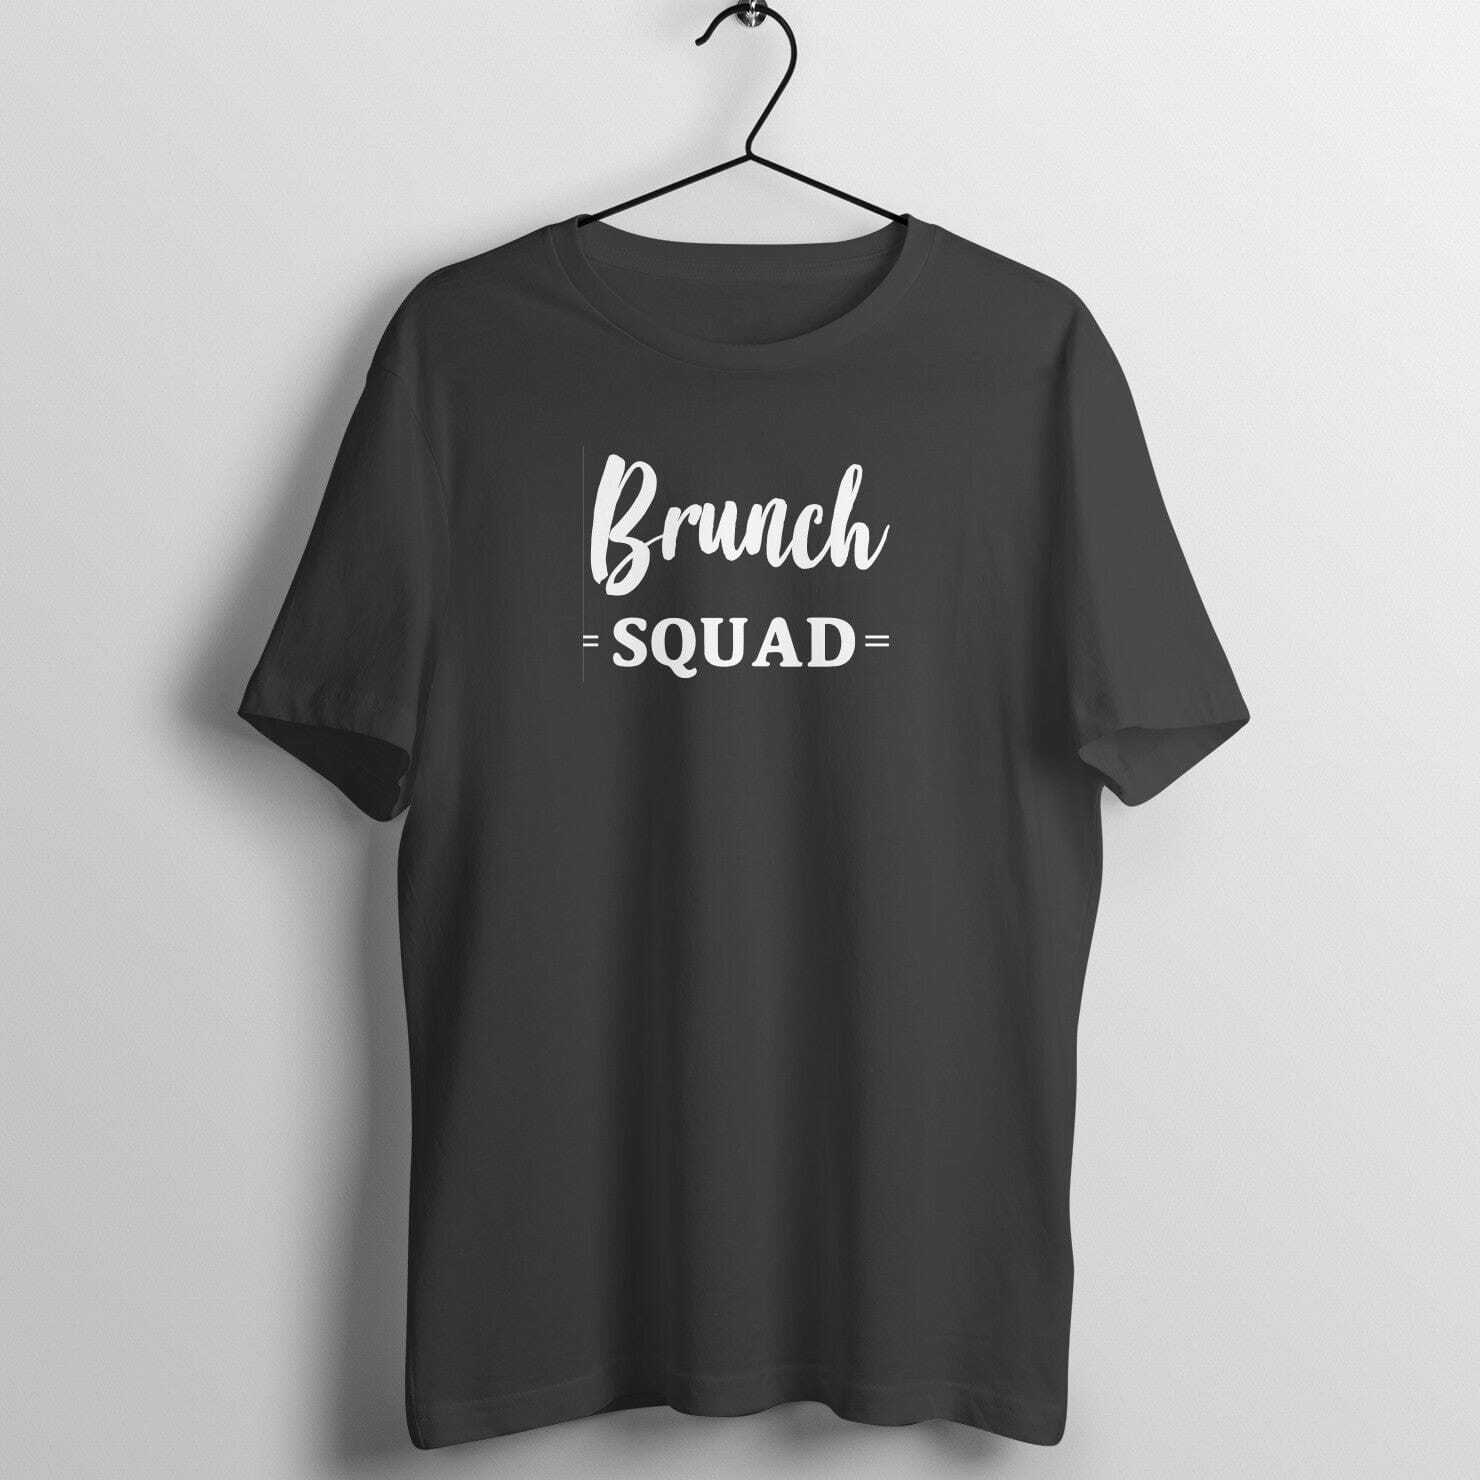 Brunch Squad Exclusive Relaxing Black T Shirt for Men and Women Printrove Black S 